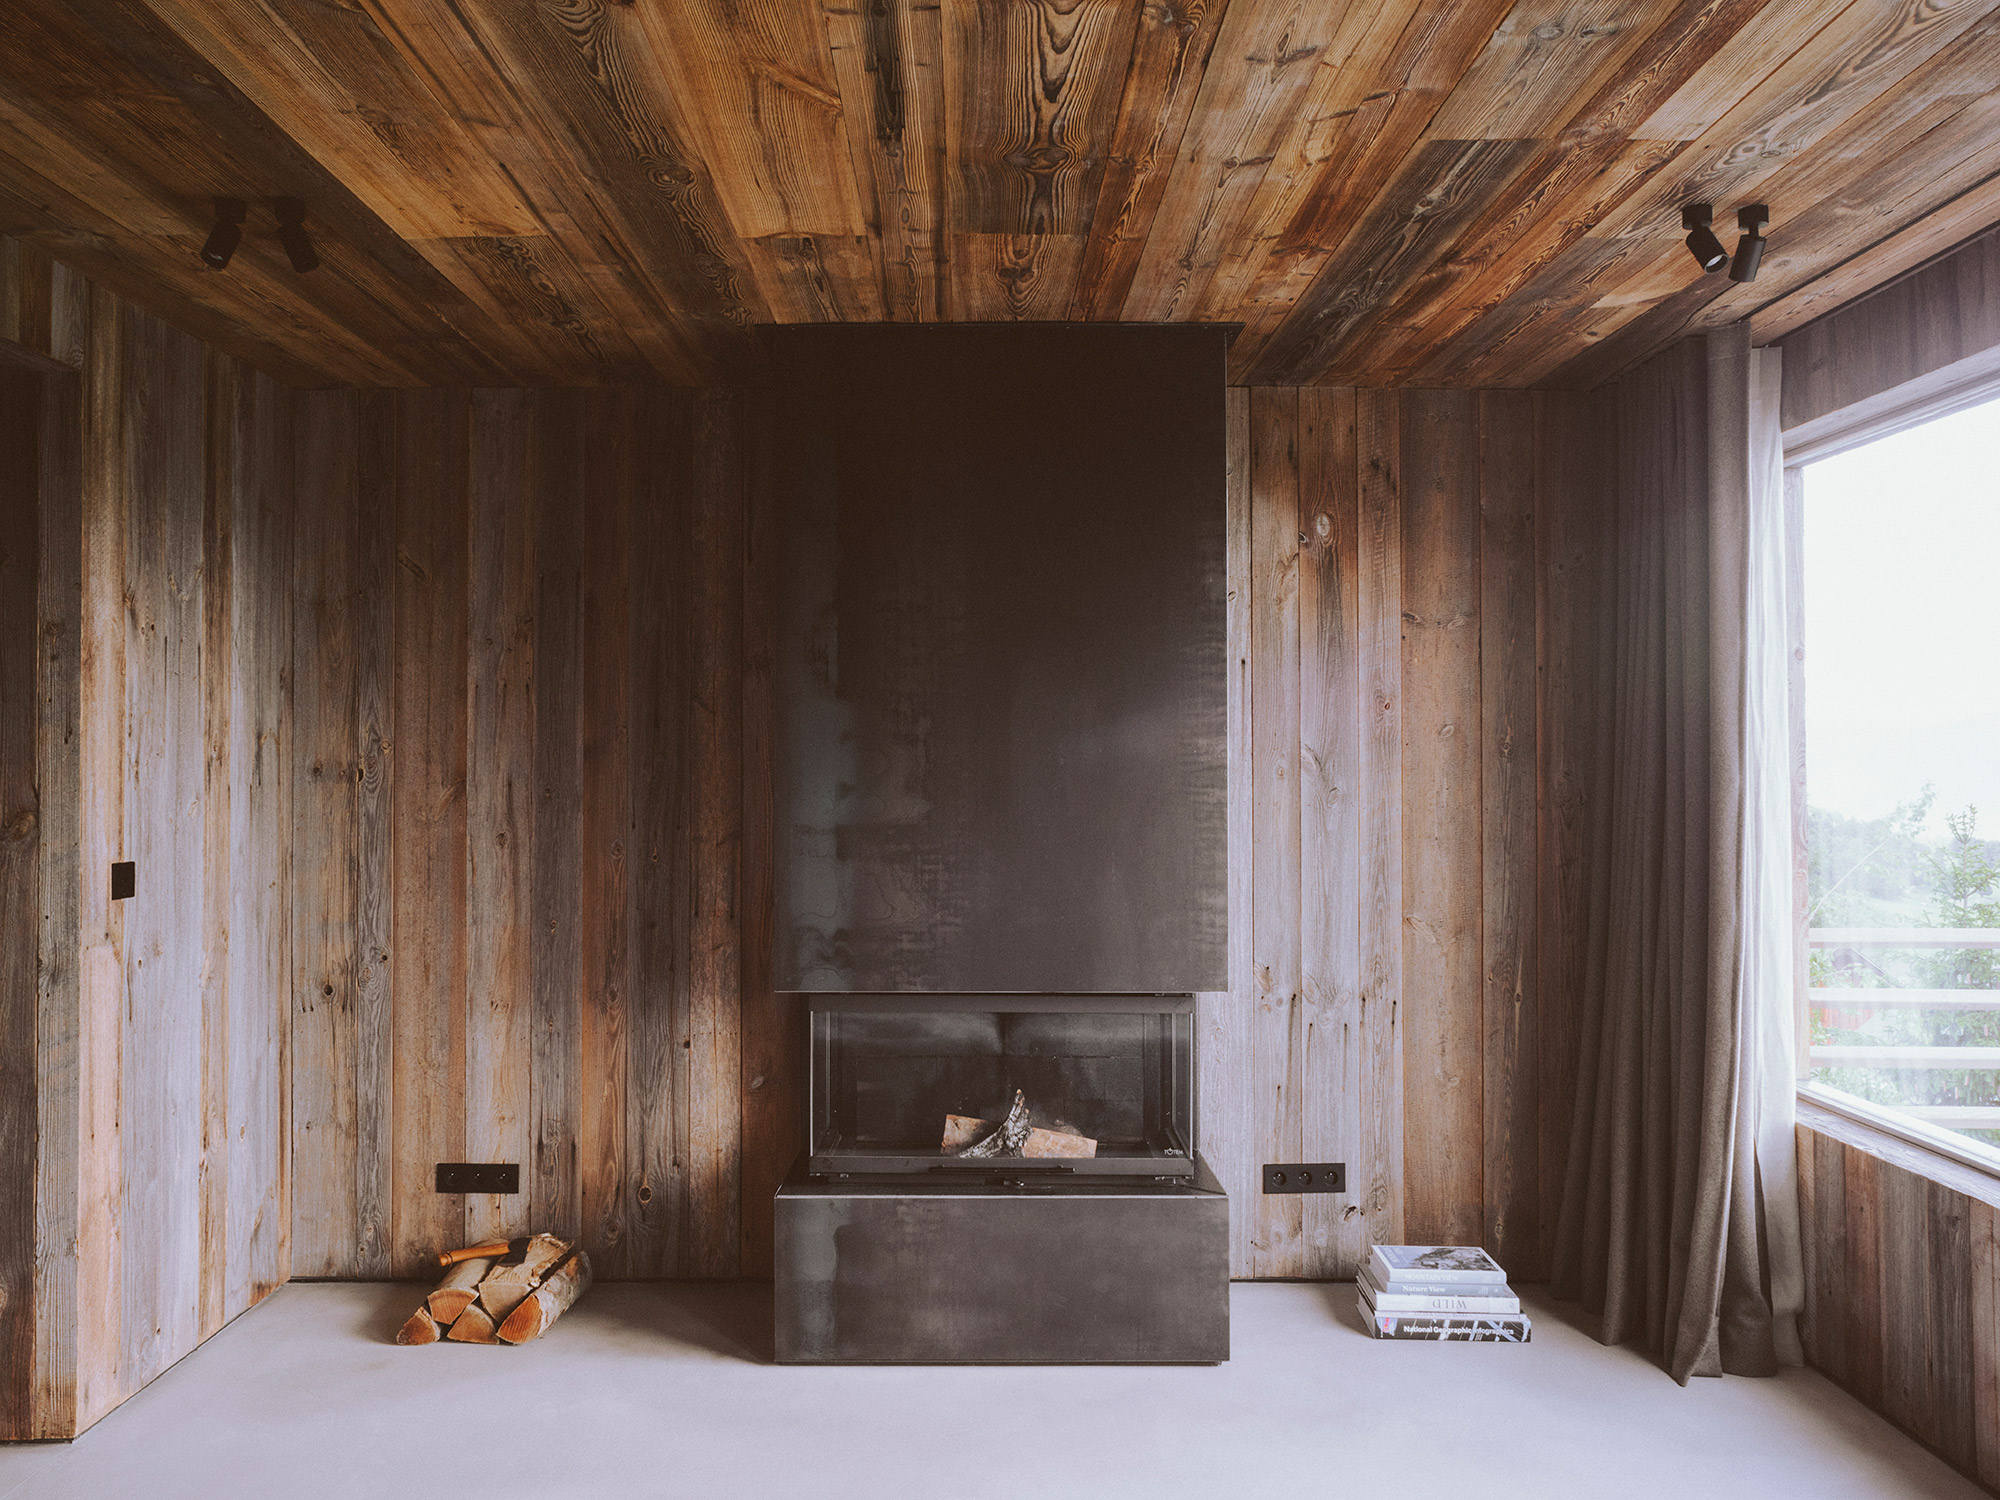 Rustic alpine chalet, stainless steel fireplace